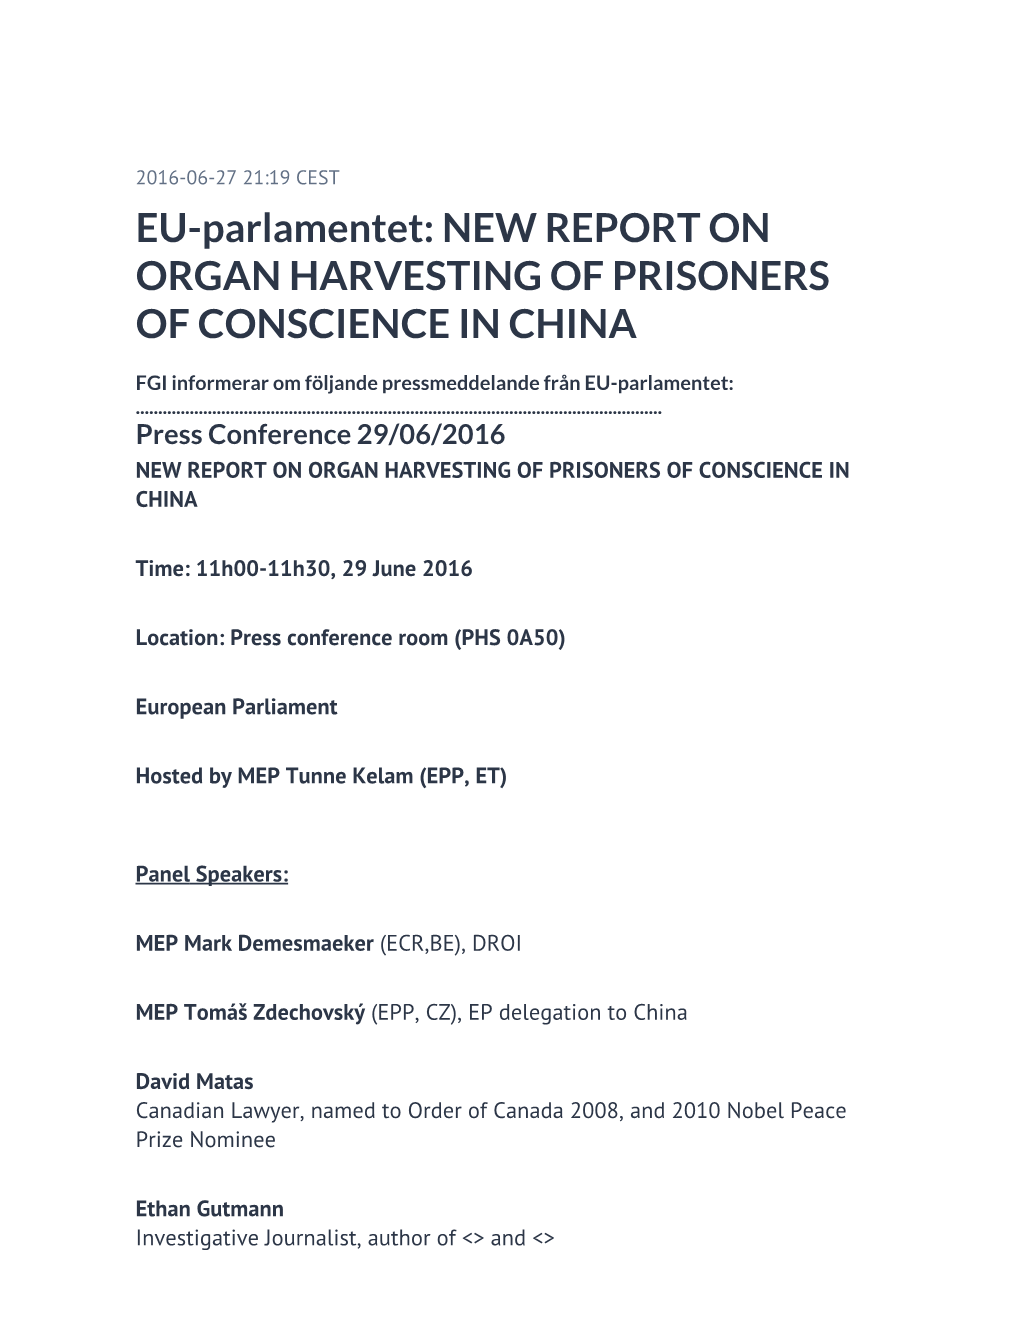 EU-Parlamentet: NEW REPORT on ORGAN HARVESTING of PRISONERS of CONSCIENCE in CHINA